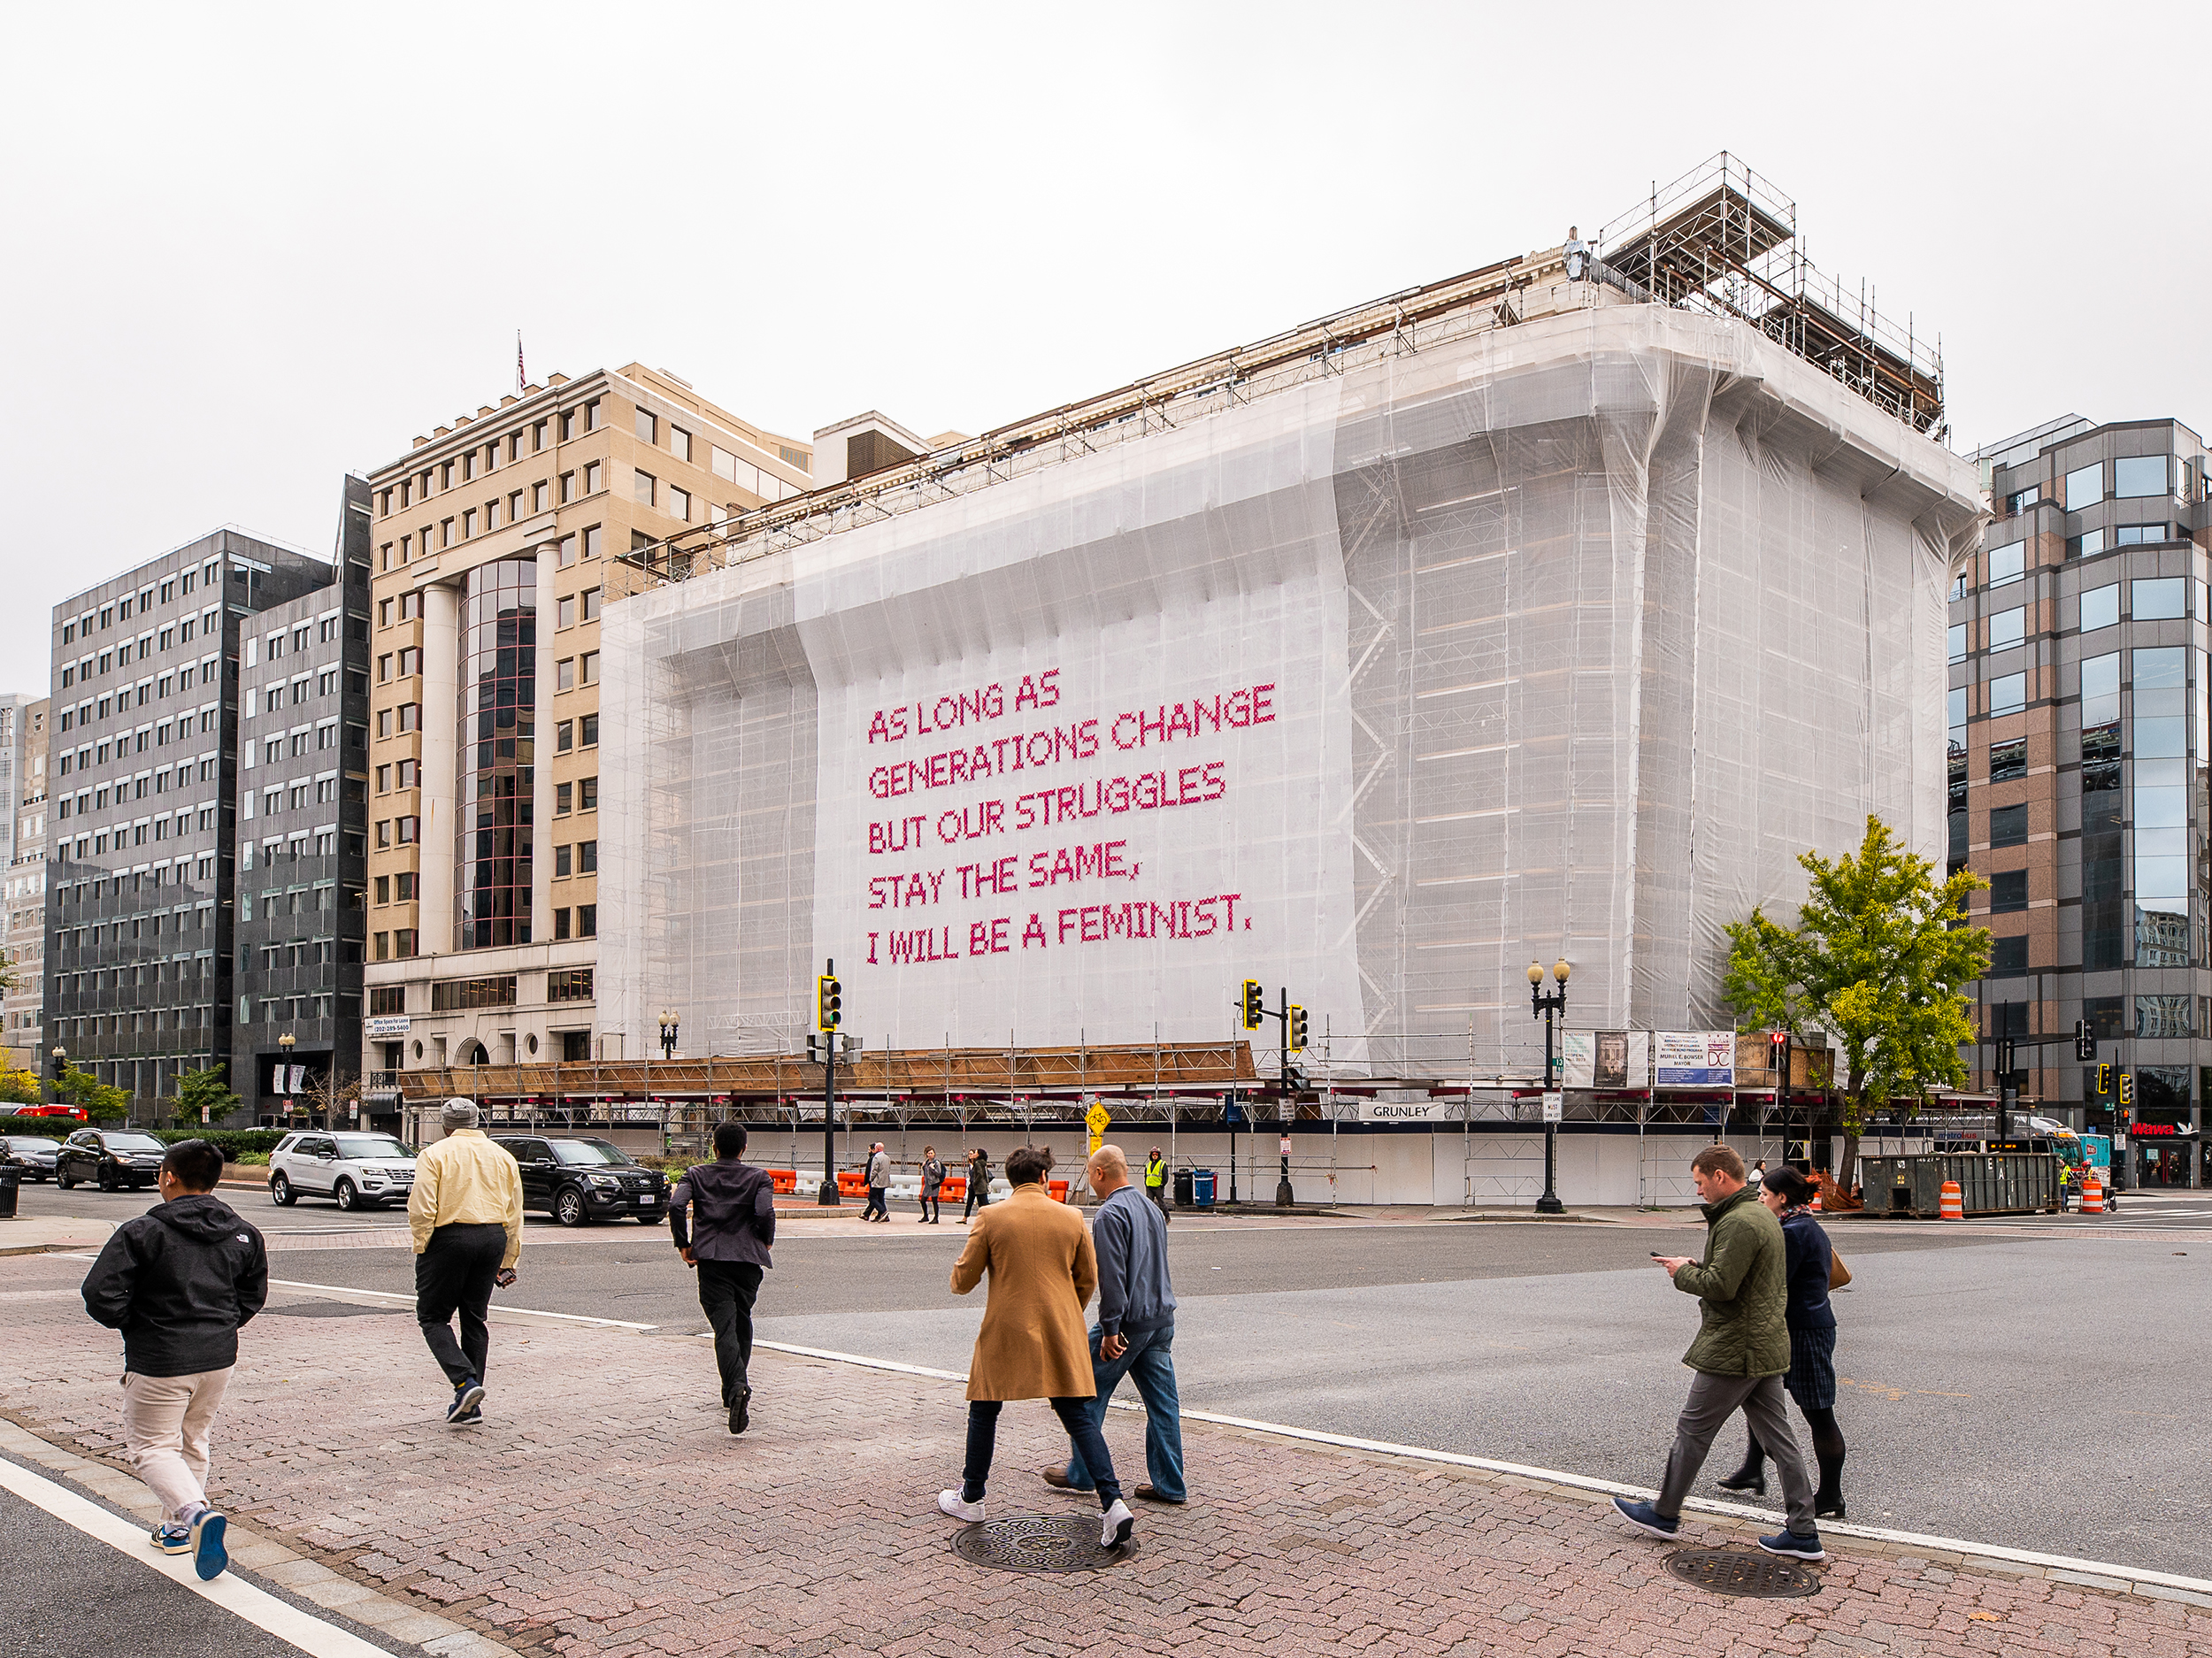 White gauzy fabric hangs in front of scaffolding surrounding a city building. Bold magenta letters on the fabric read, “As long as generations change but our struggles stay the same, I will be a feminist.” Several passersby cross the street in front of the building.